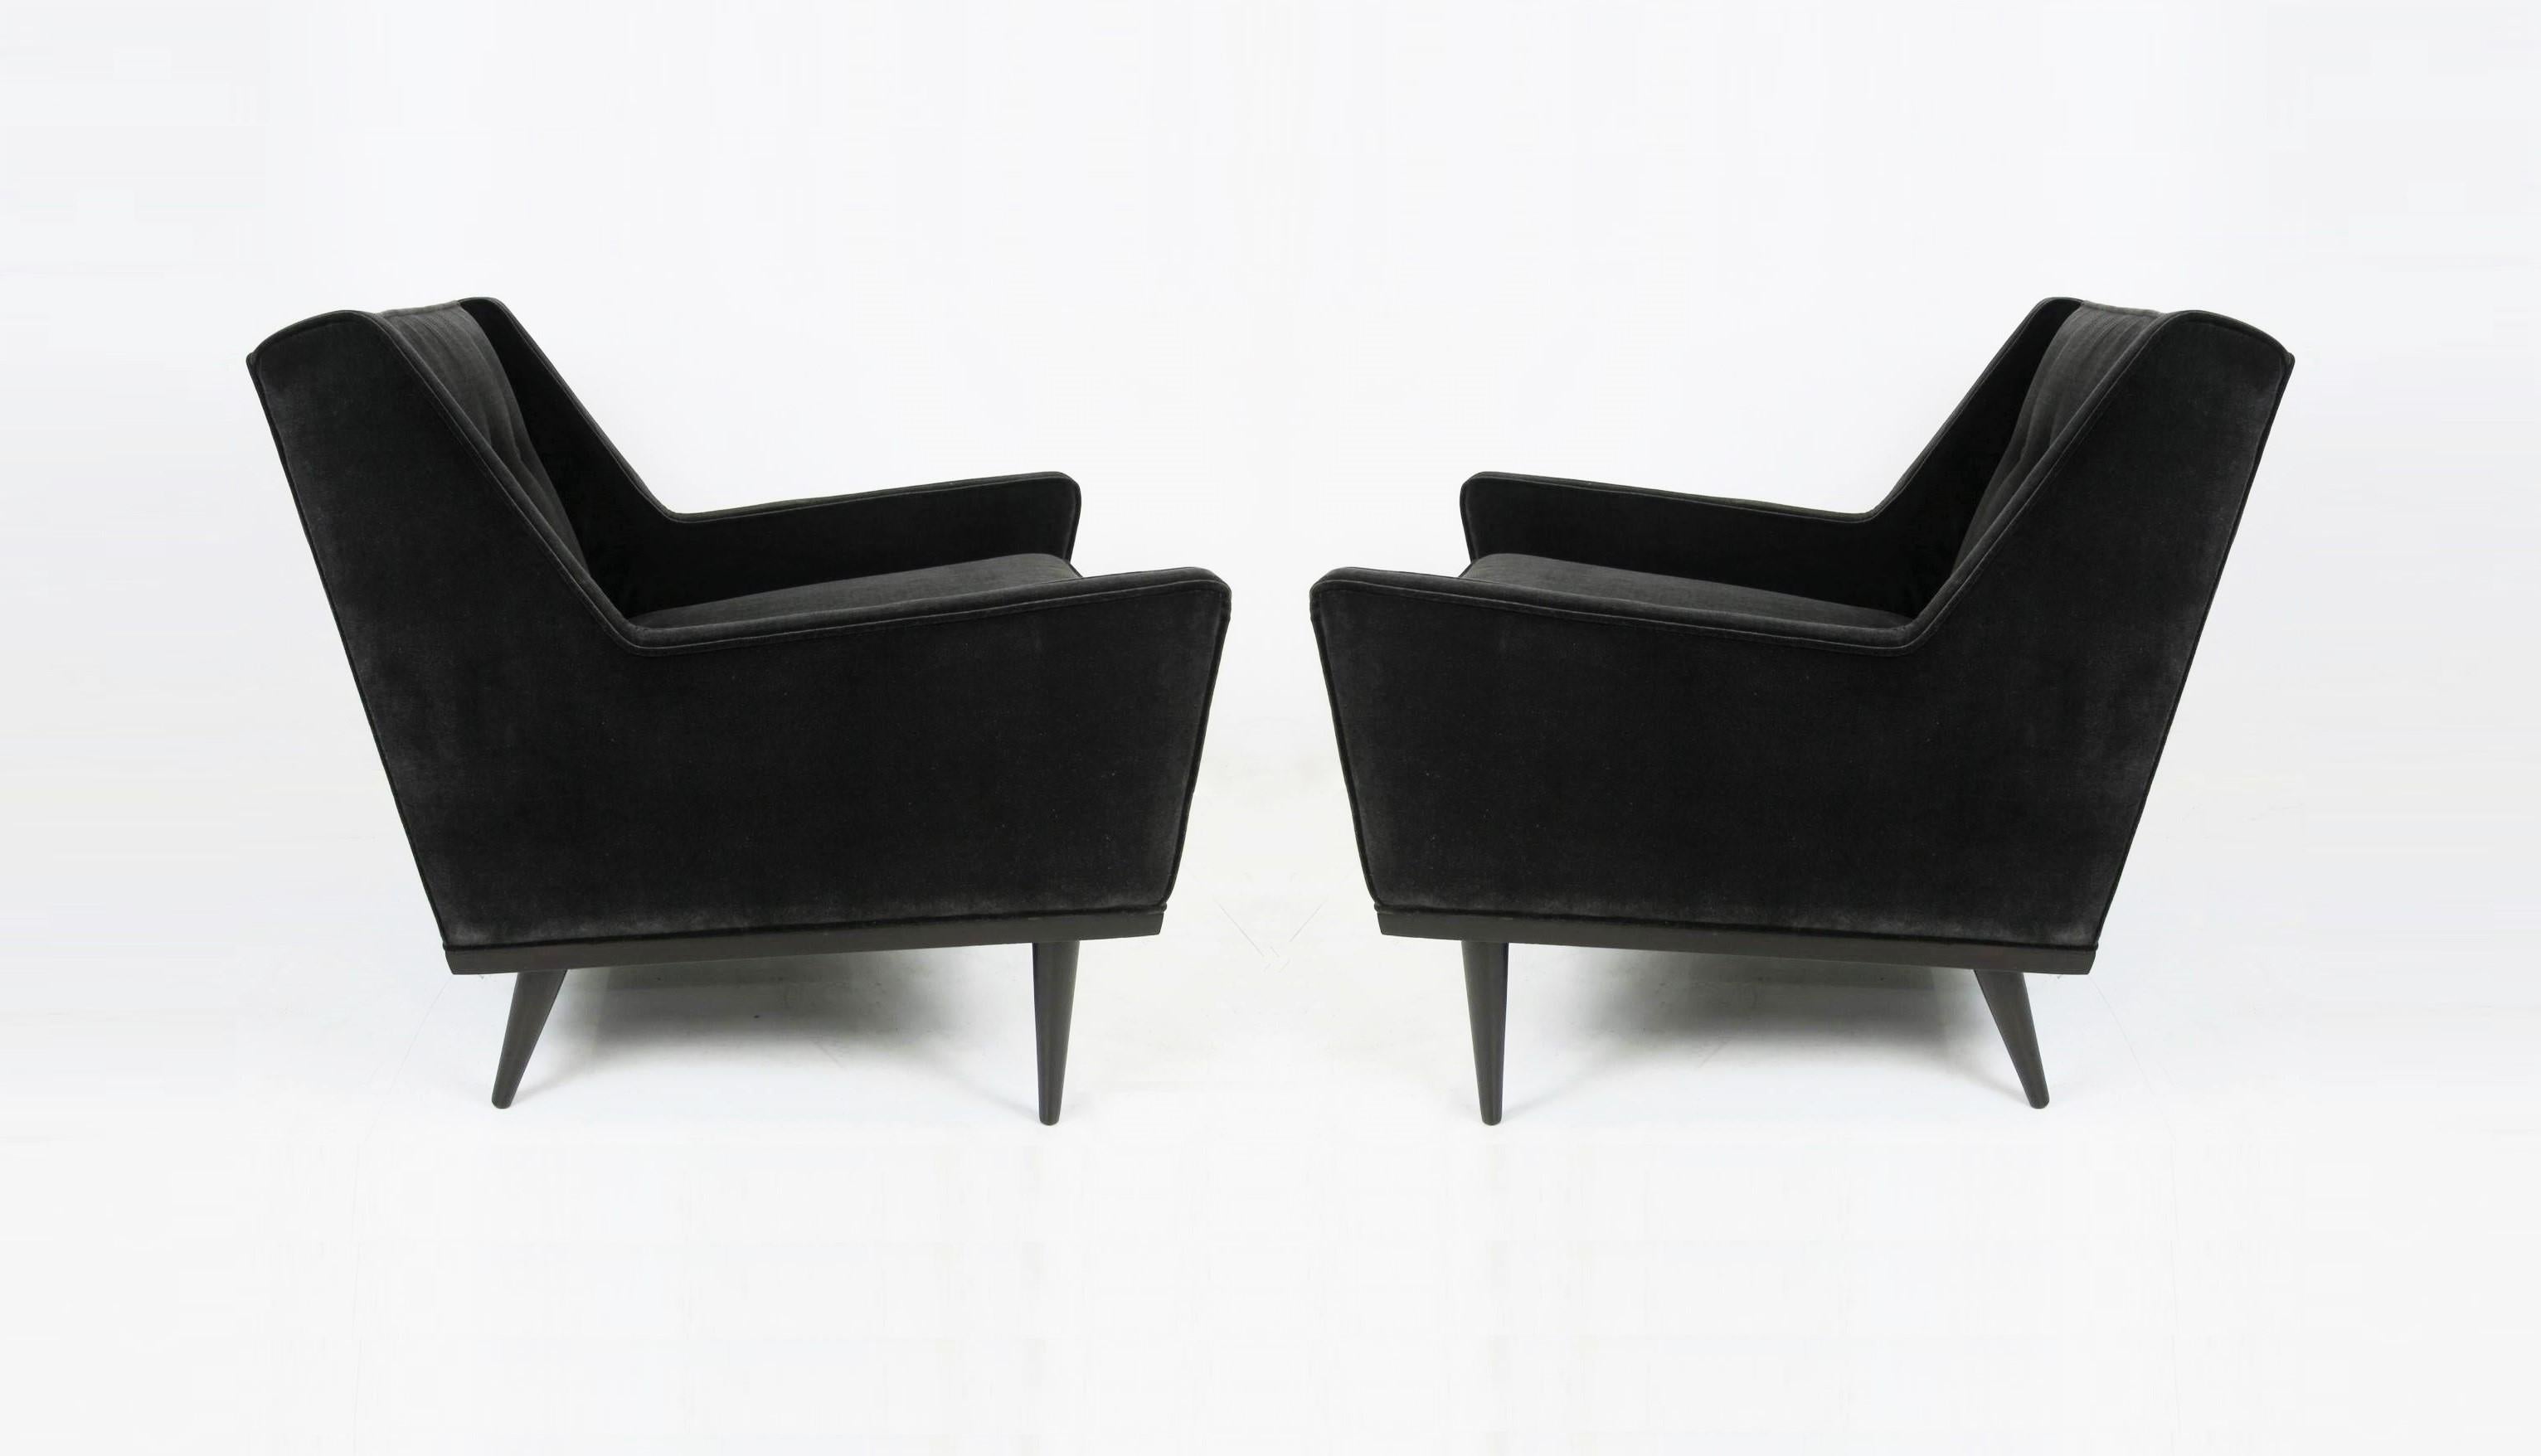 Absolutely stunning club lounge chairs designed by Milo Baughman for James Inc, an early imprint of Thayer Coggin. Defined by their Classic midcentury lines and simple walnut framed base. This pair features sculptural low slung form, pointed corners